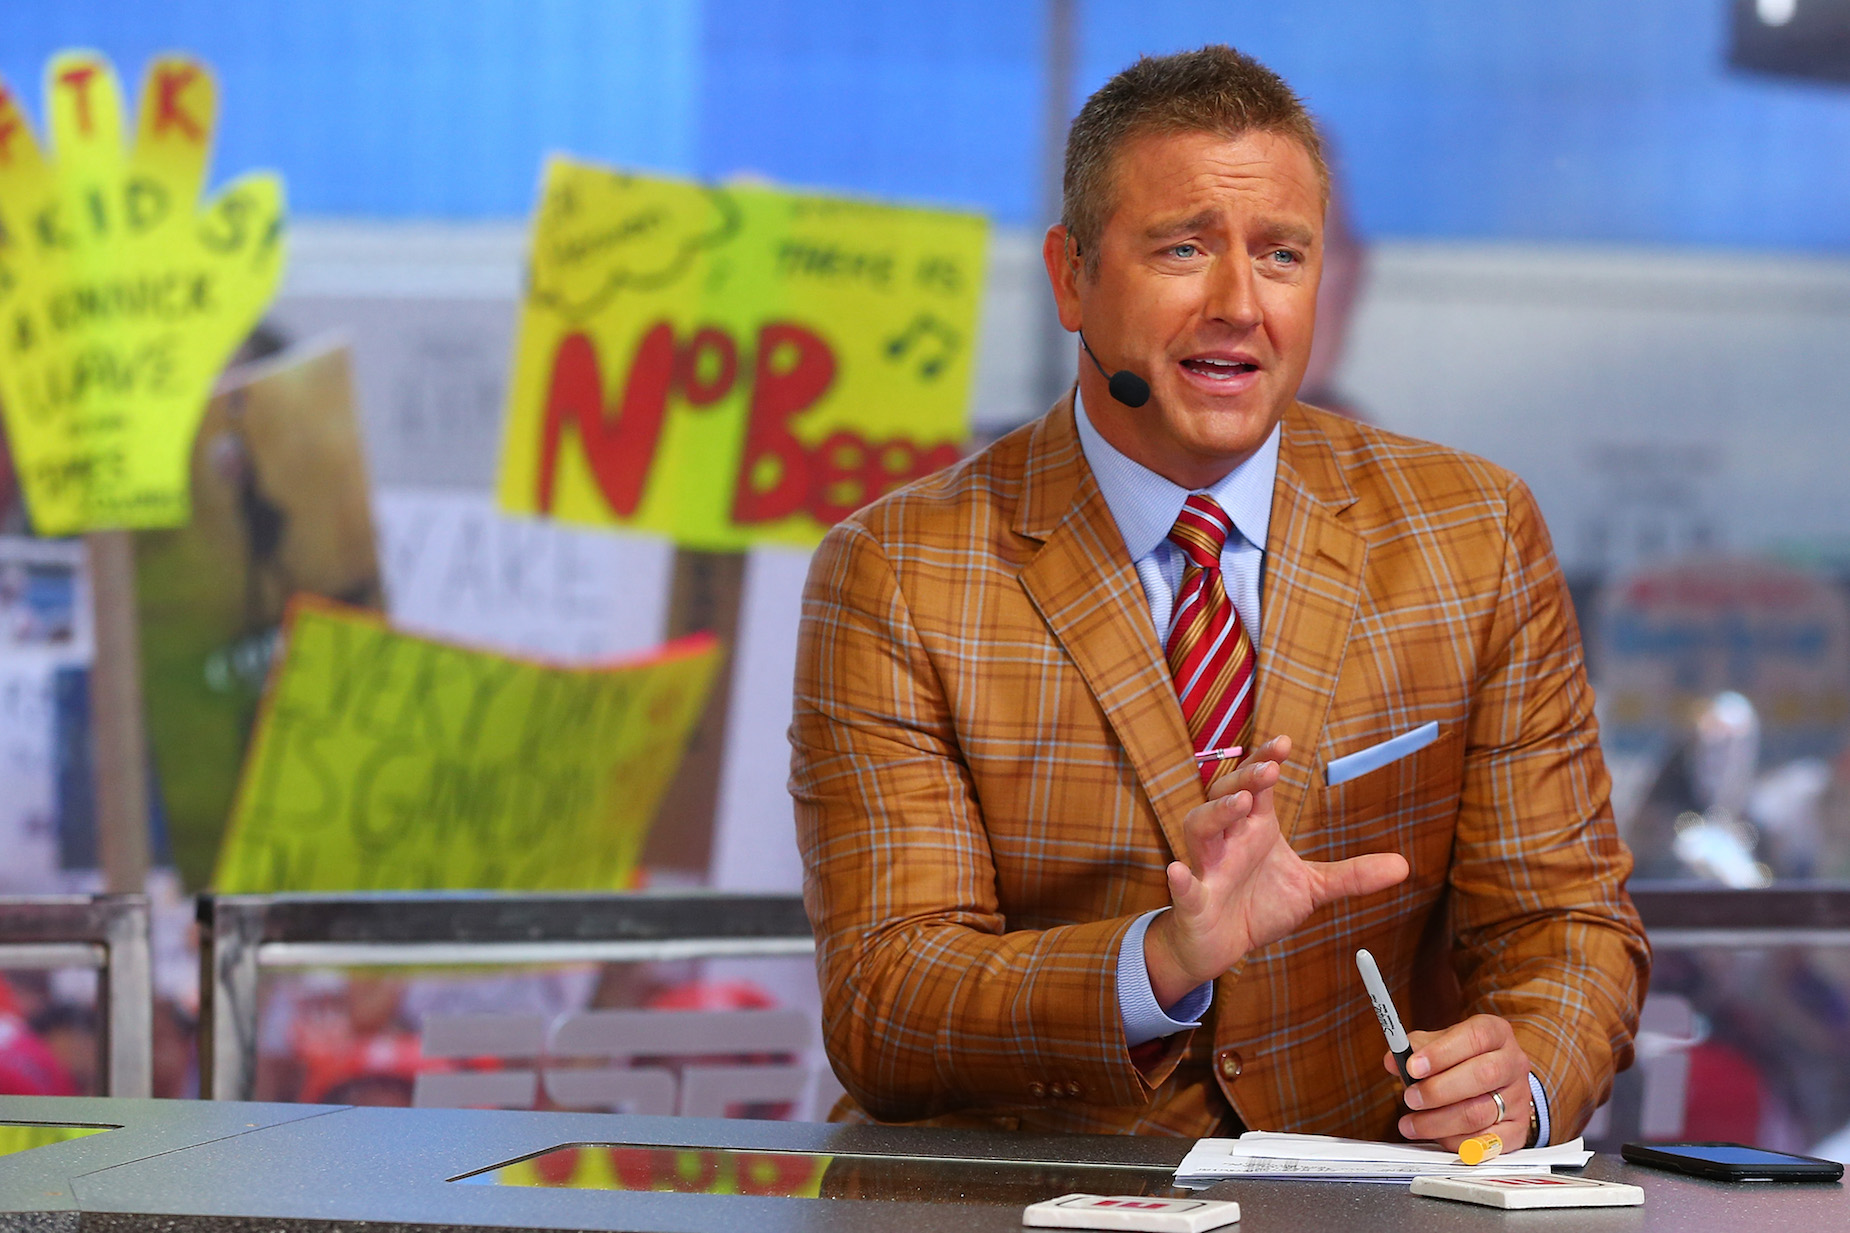 Kirk Herbstreit had to leave Ohio after some issues with Ohio State fans.